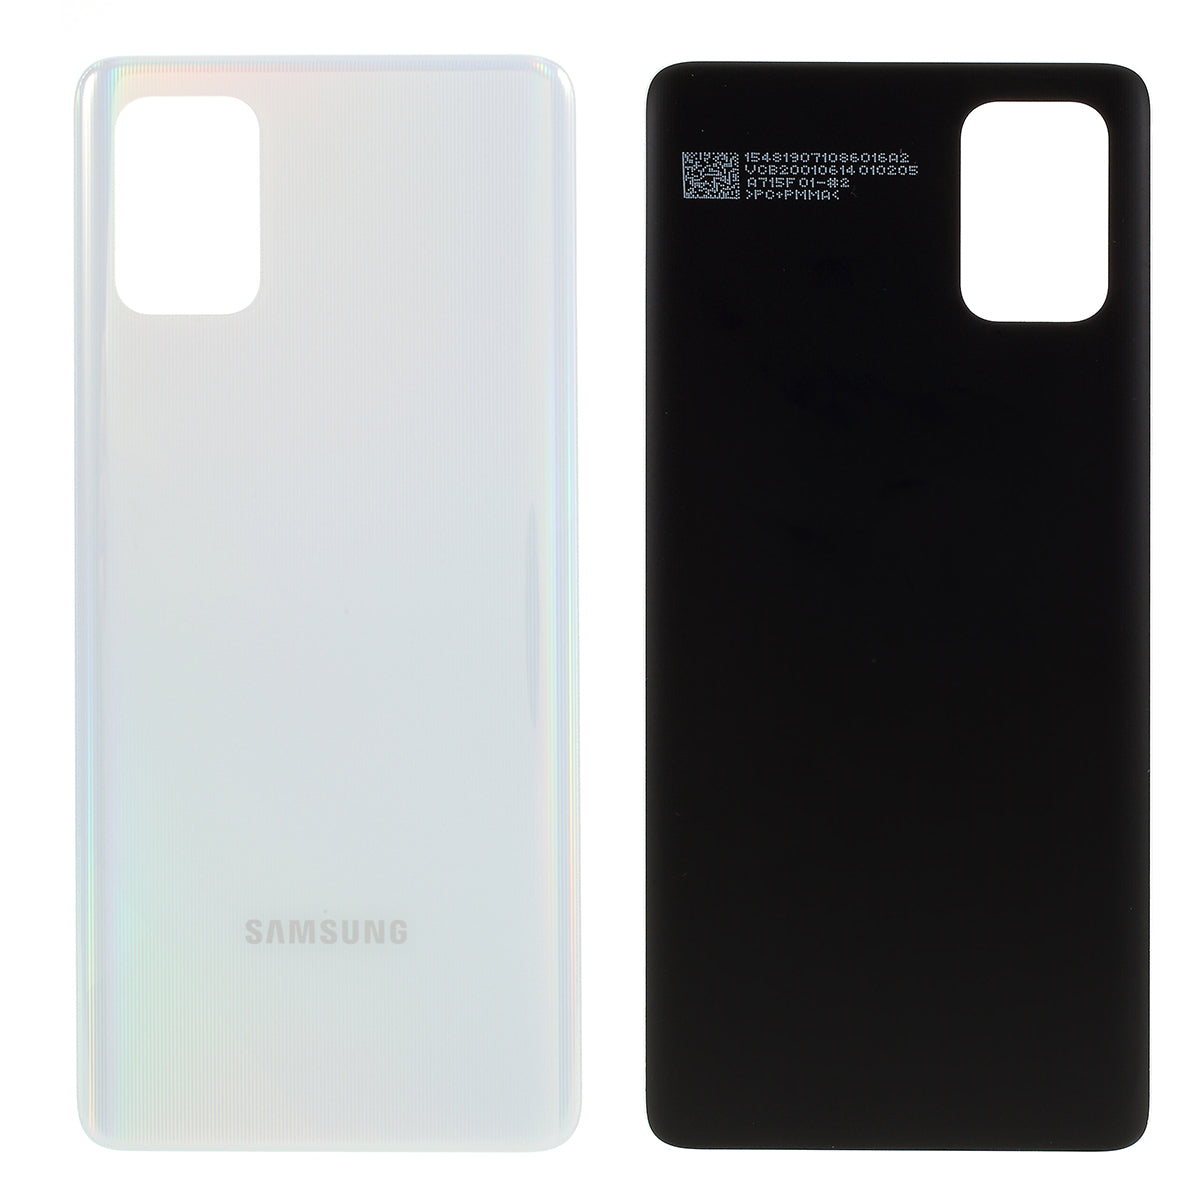 OEM for Samsung Galaxy A71 A715 Back Battery Housing without Adhesive Sticker - White